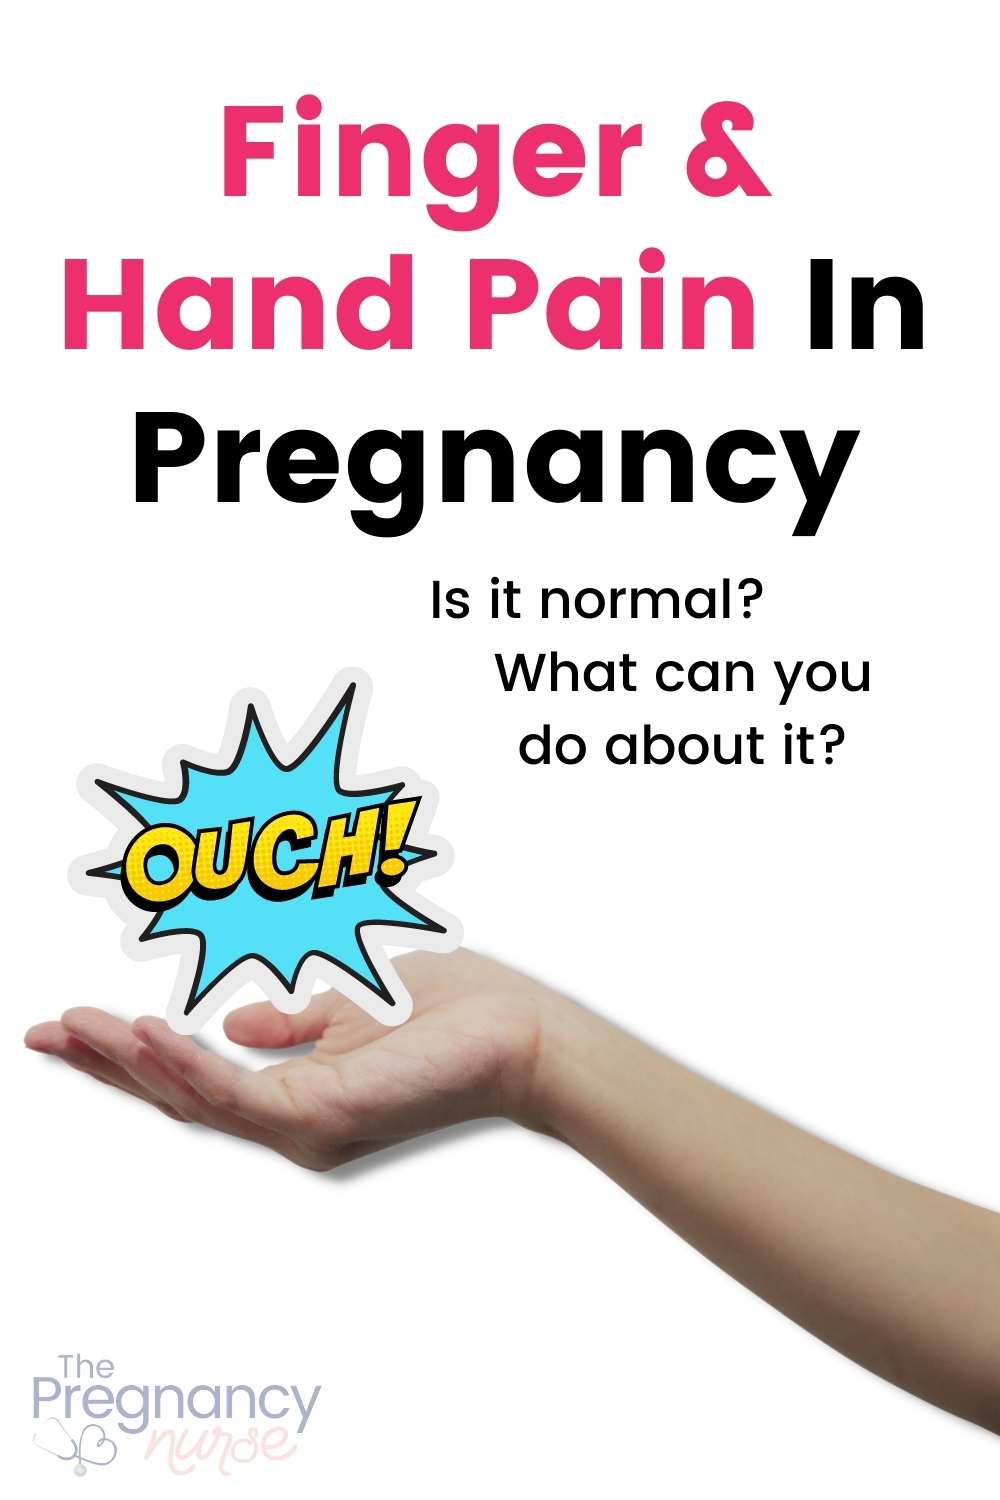 If you're experiencing hand and finger joint pain during your pregnancy, don't worry - you're not alone! In this blog post, we will discuss the causes of hand and finger joint pain during pregnancy and present some tips on how to relieve the pain. We hope that this information is helpful for you. Thank you for reading!